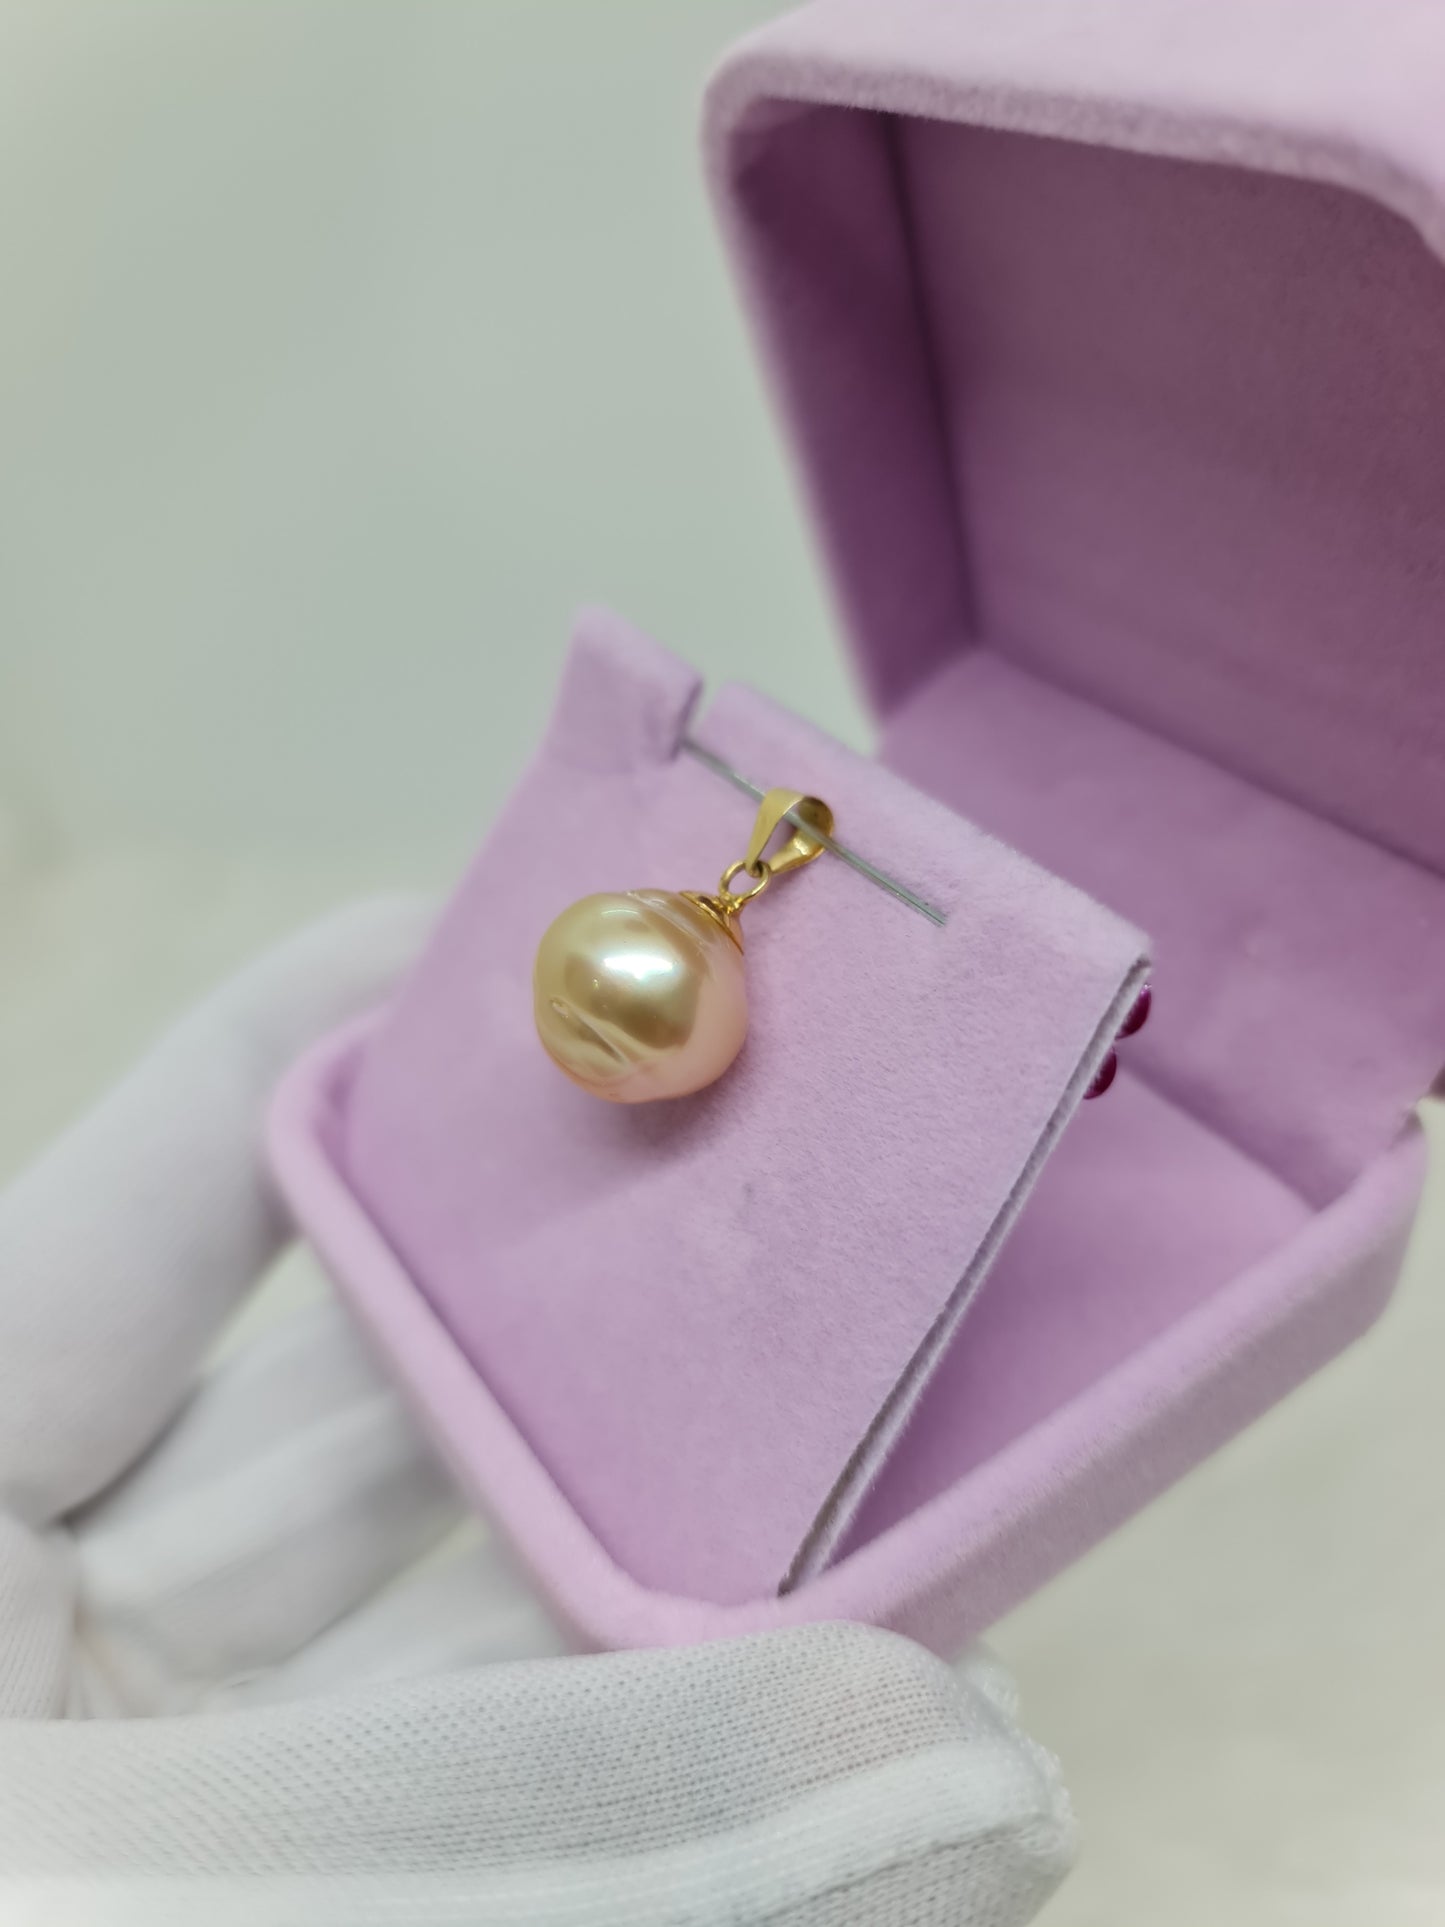 14.5mm Champagne South Sea Pearls Earrings mount in 14K Gold Big Pearls